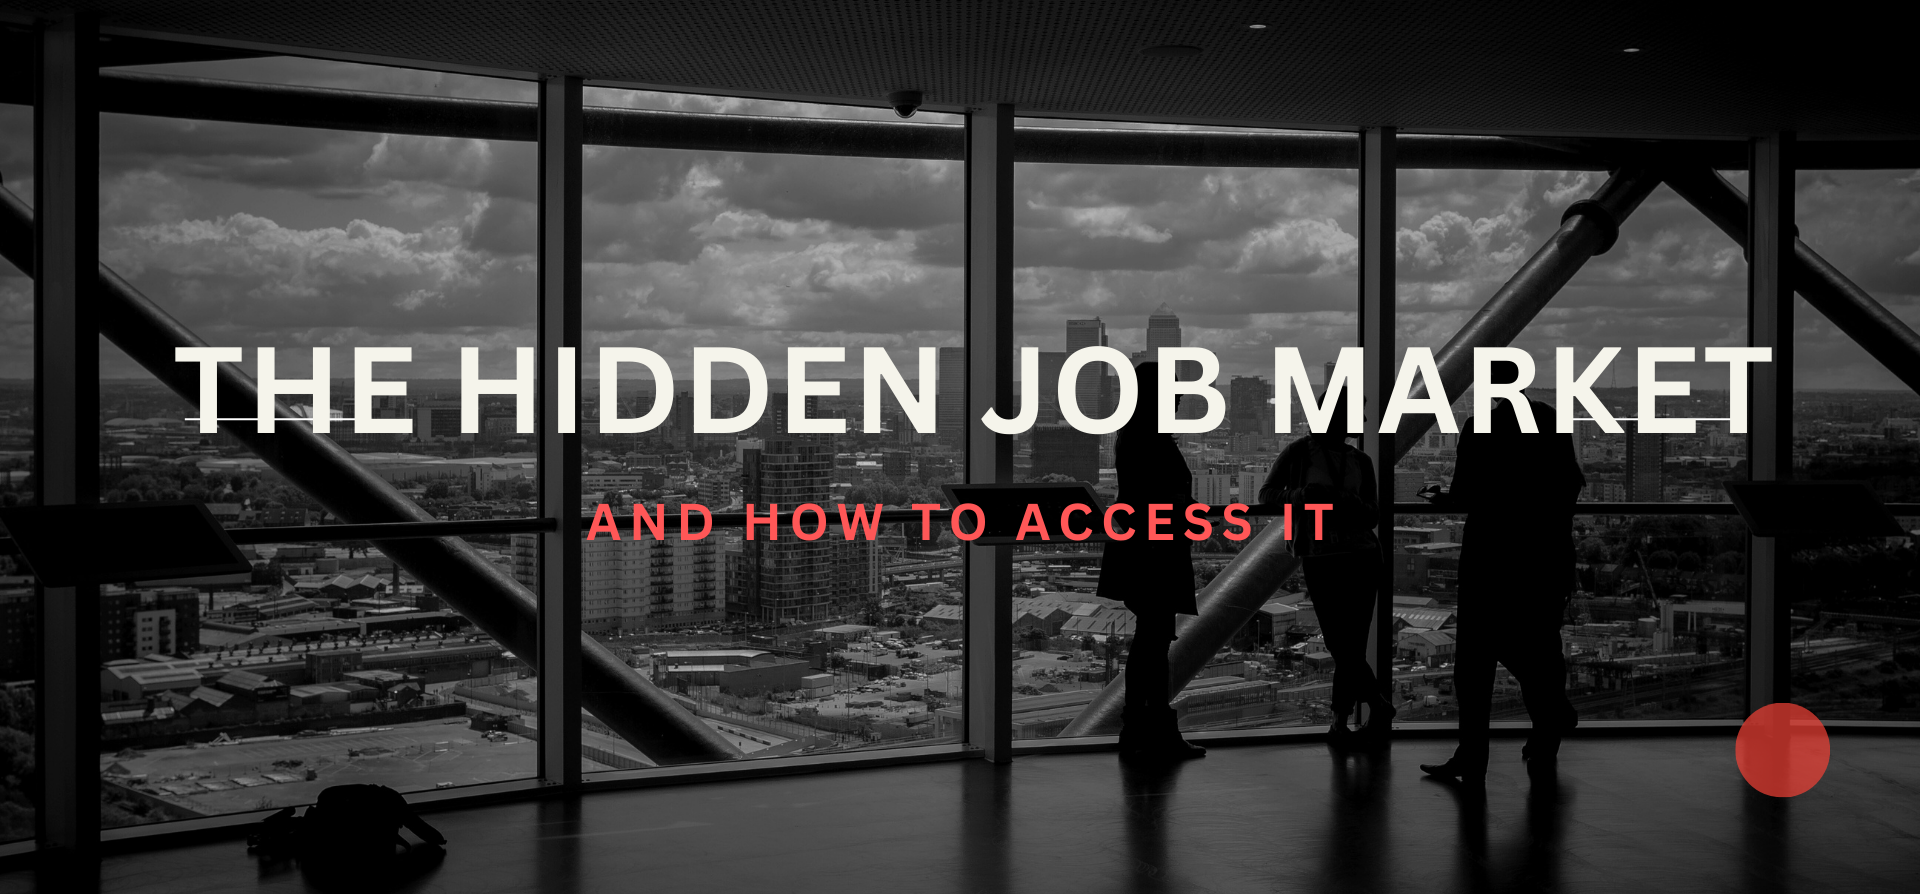 Find out what is the hidden job market and how to access it